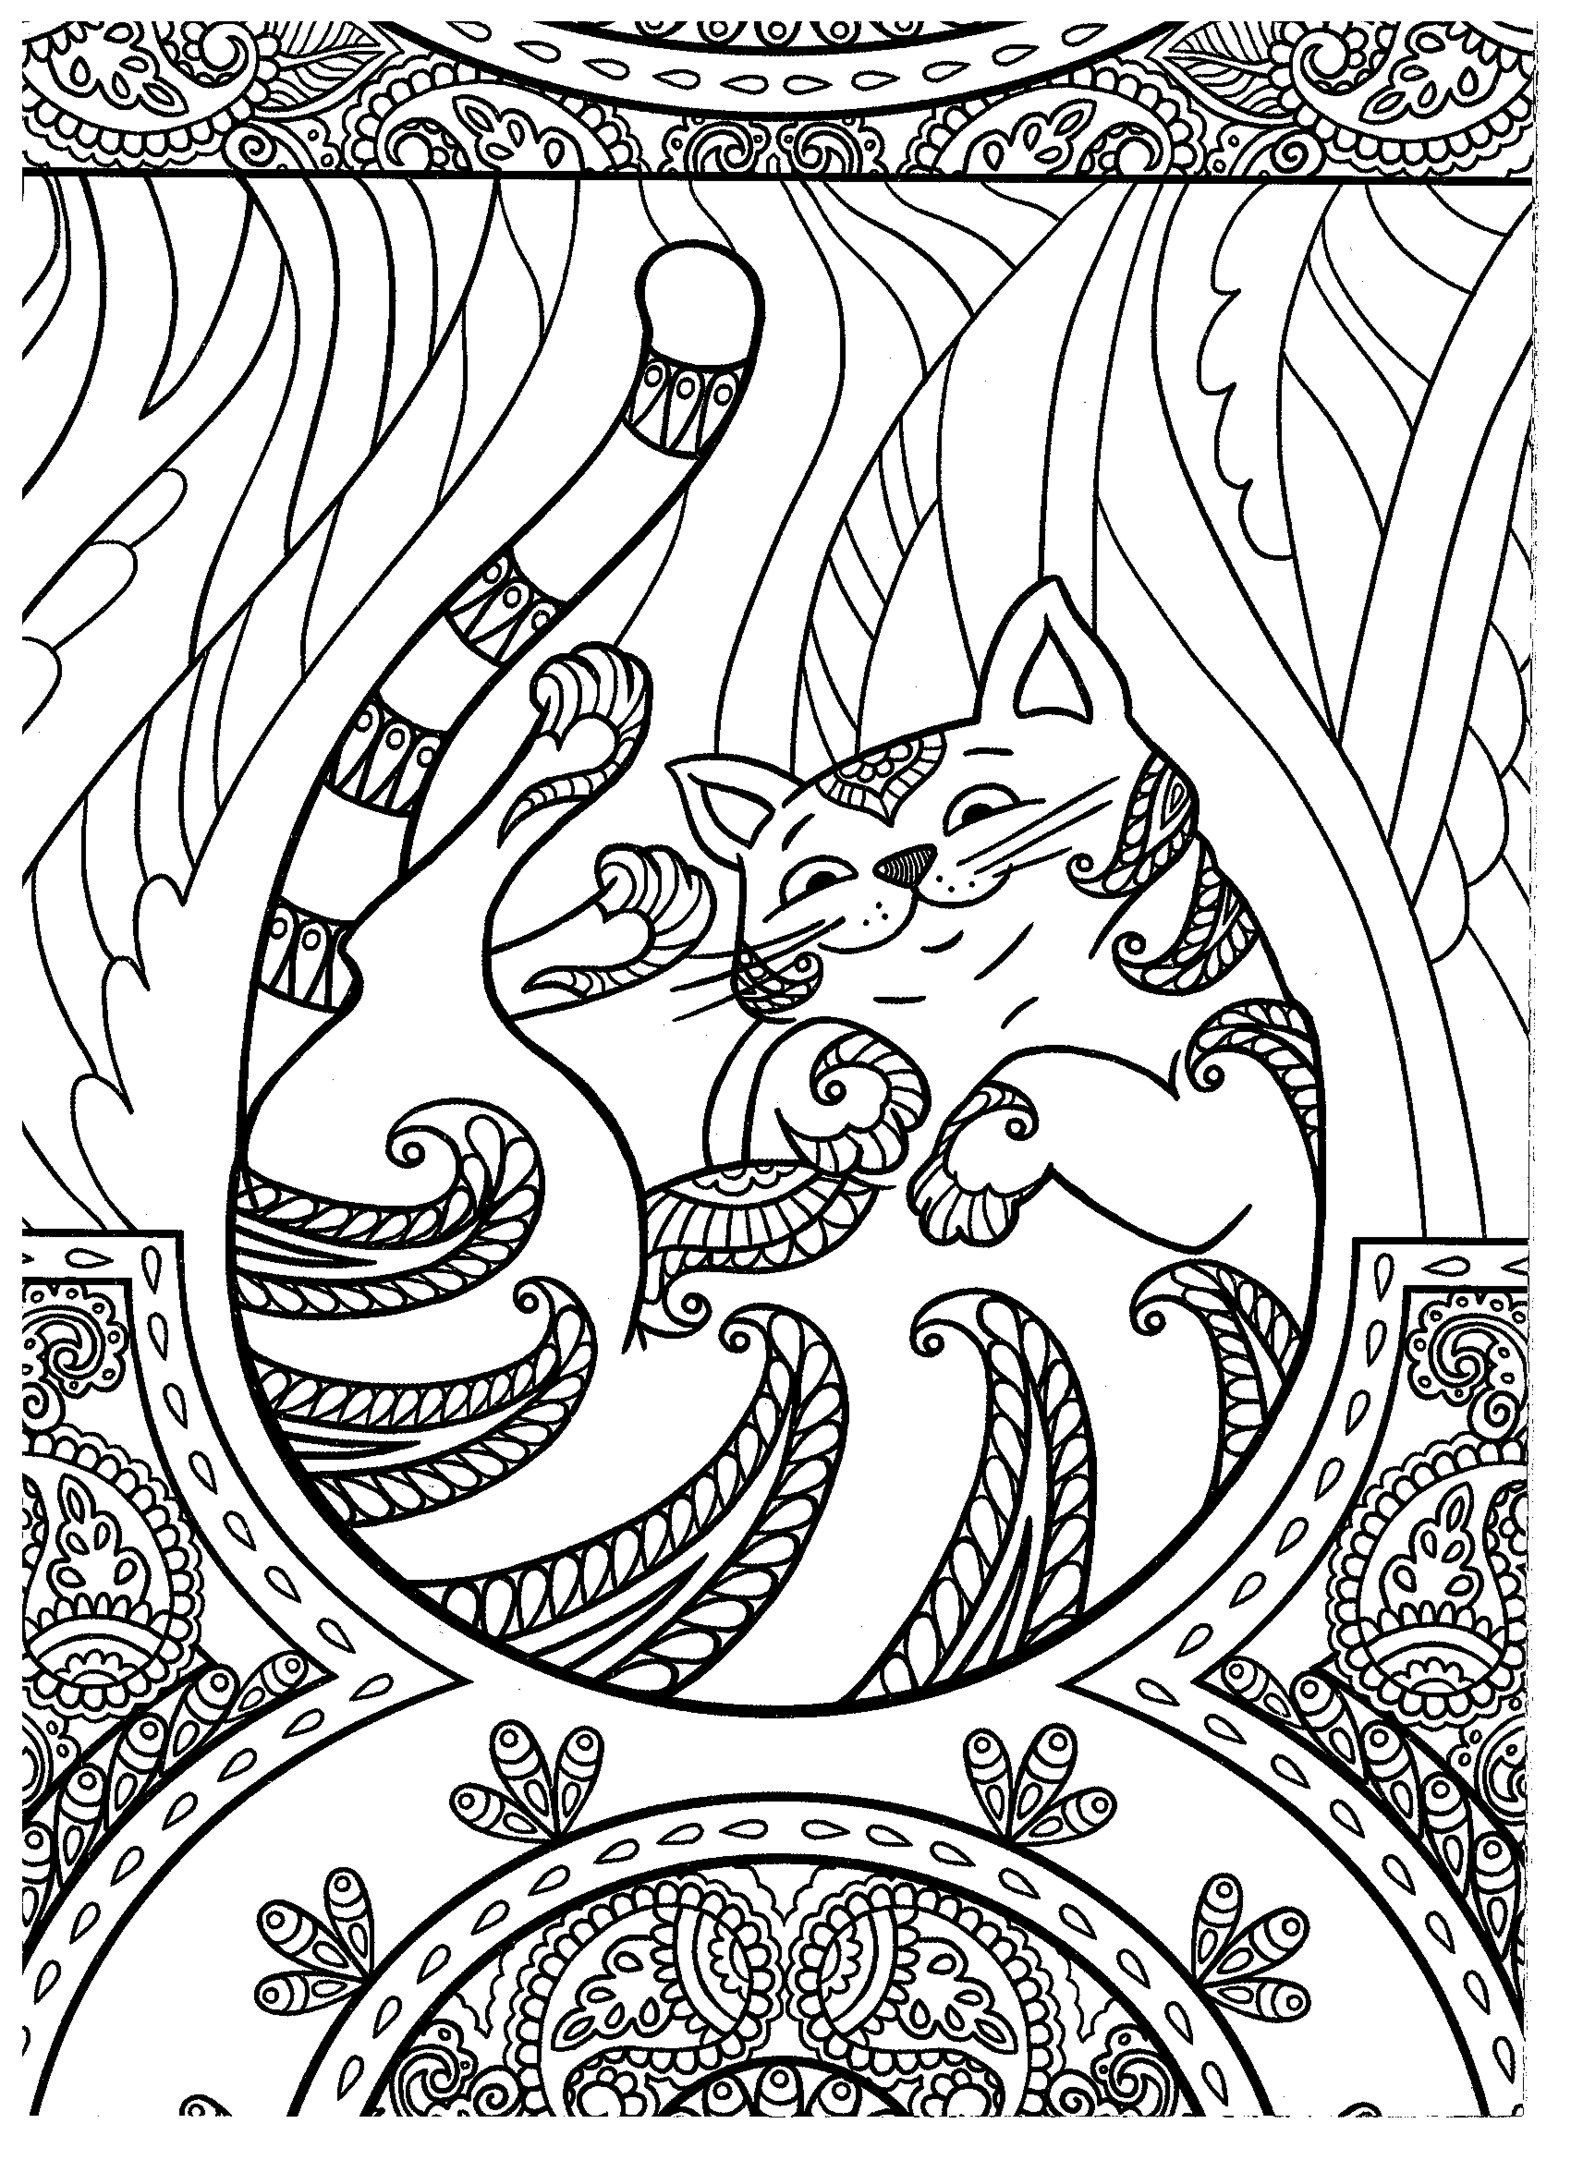 Coloring Pages For Adults Cats
 Cat coloring page Kids coloring pages books